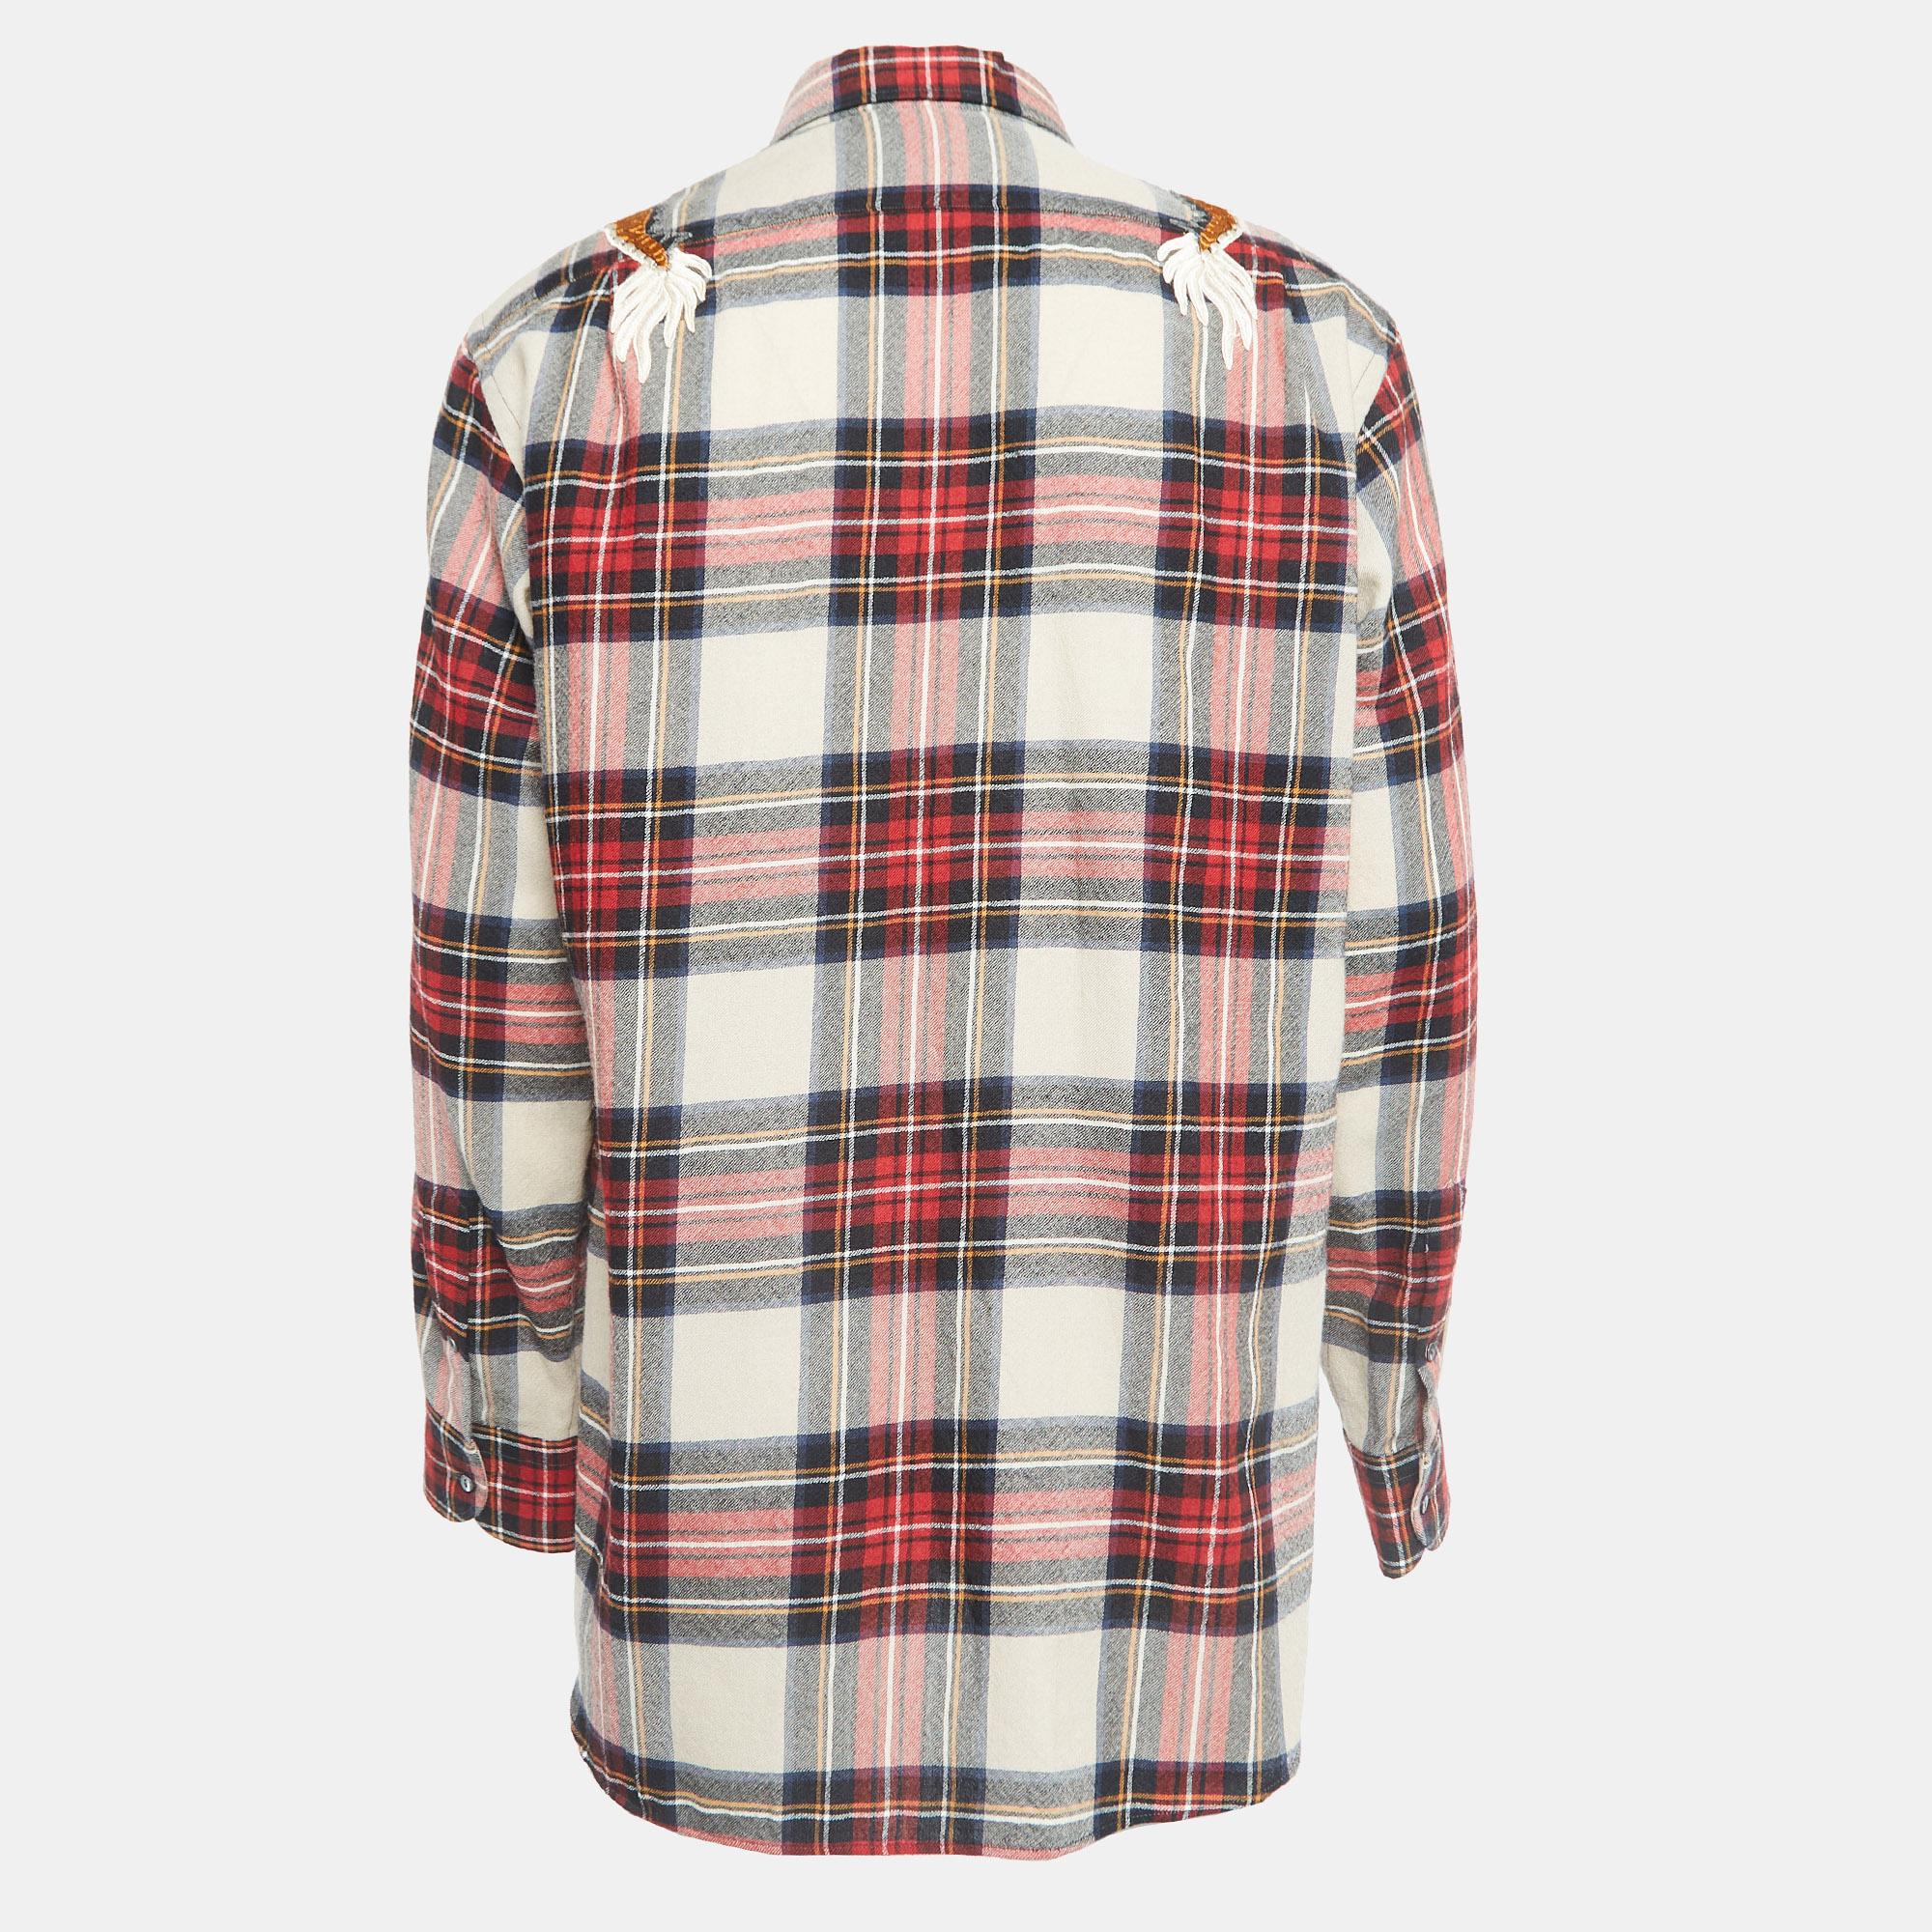 As shirts are an indispensable part of a wardrobe, Gucci brings you a creation that is both versatile and stylish. It has been tailored from high-quality fabric for a classy look and fit.

